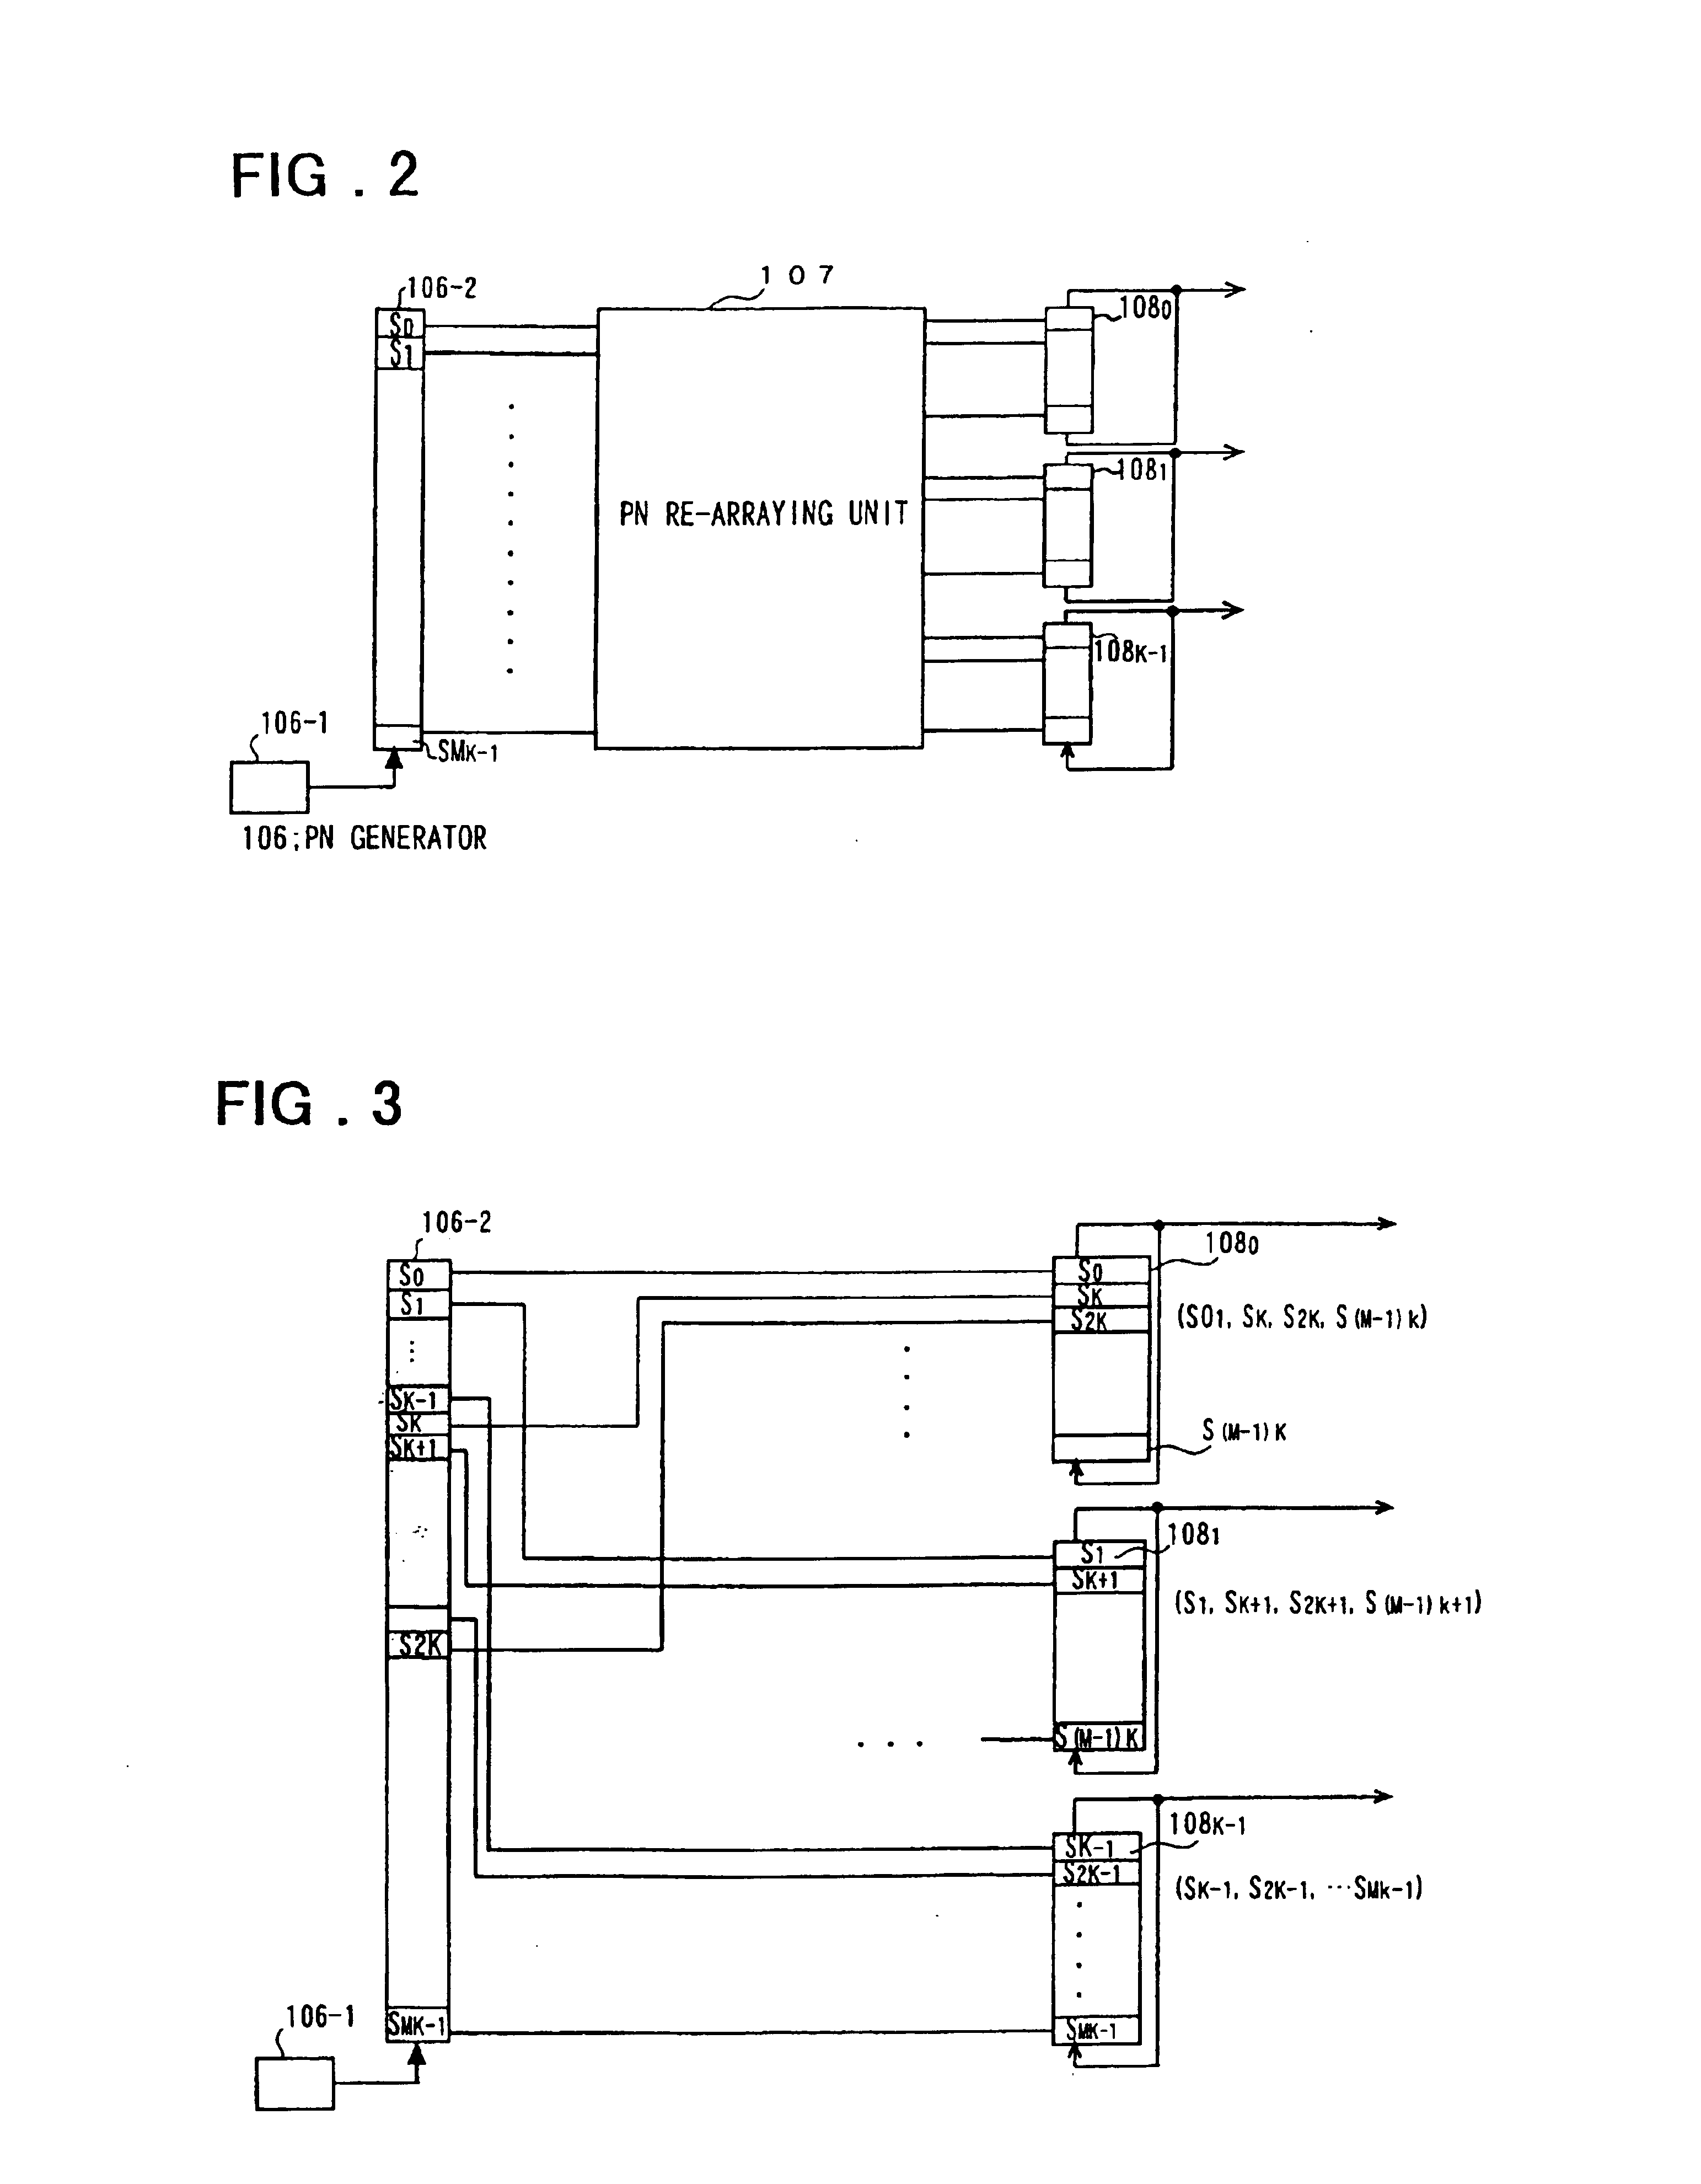 Fixed pattern detection apparatus